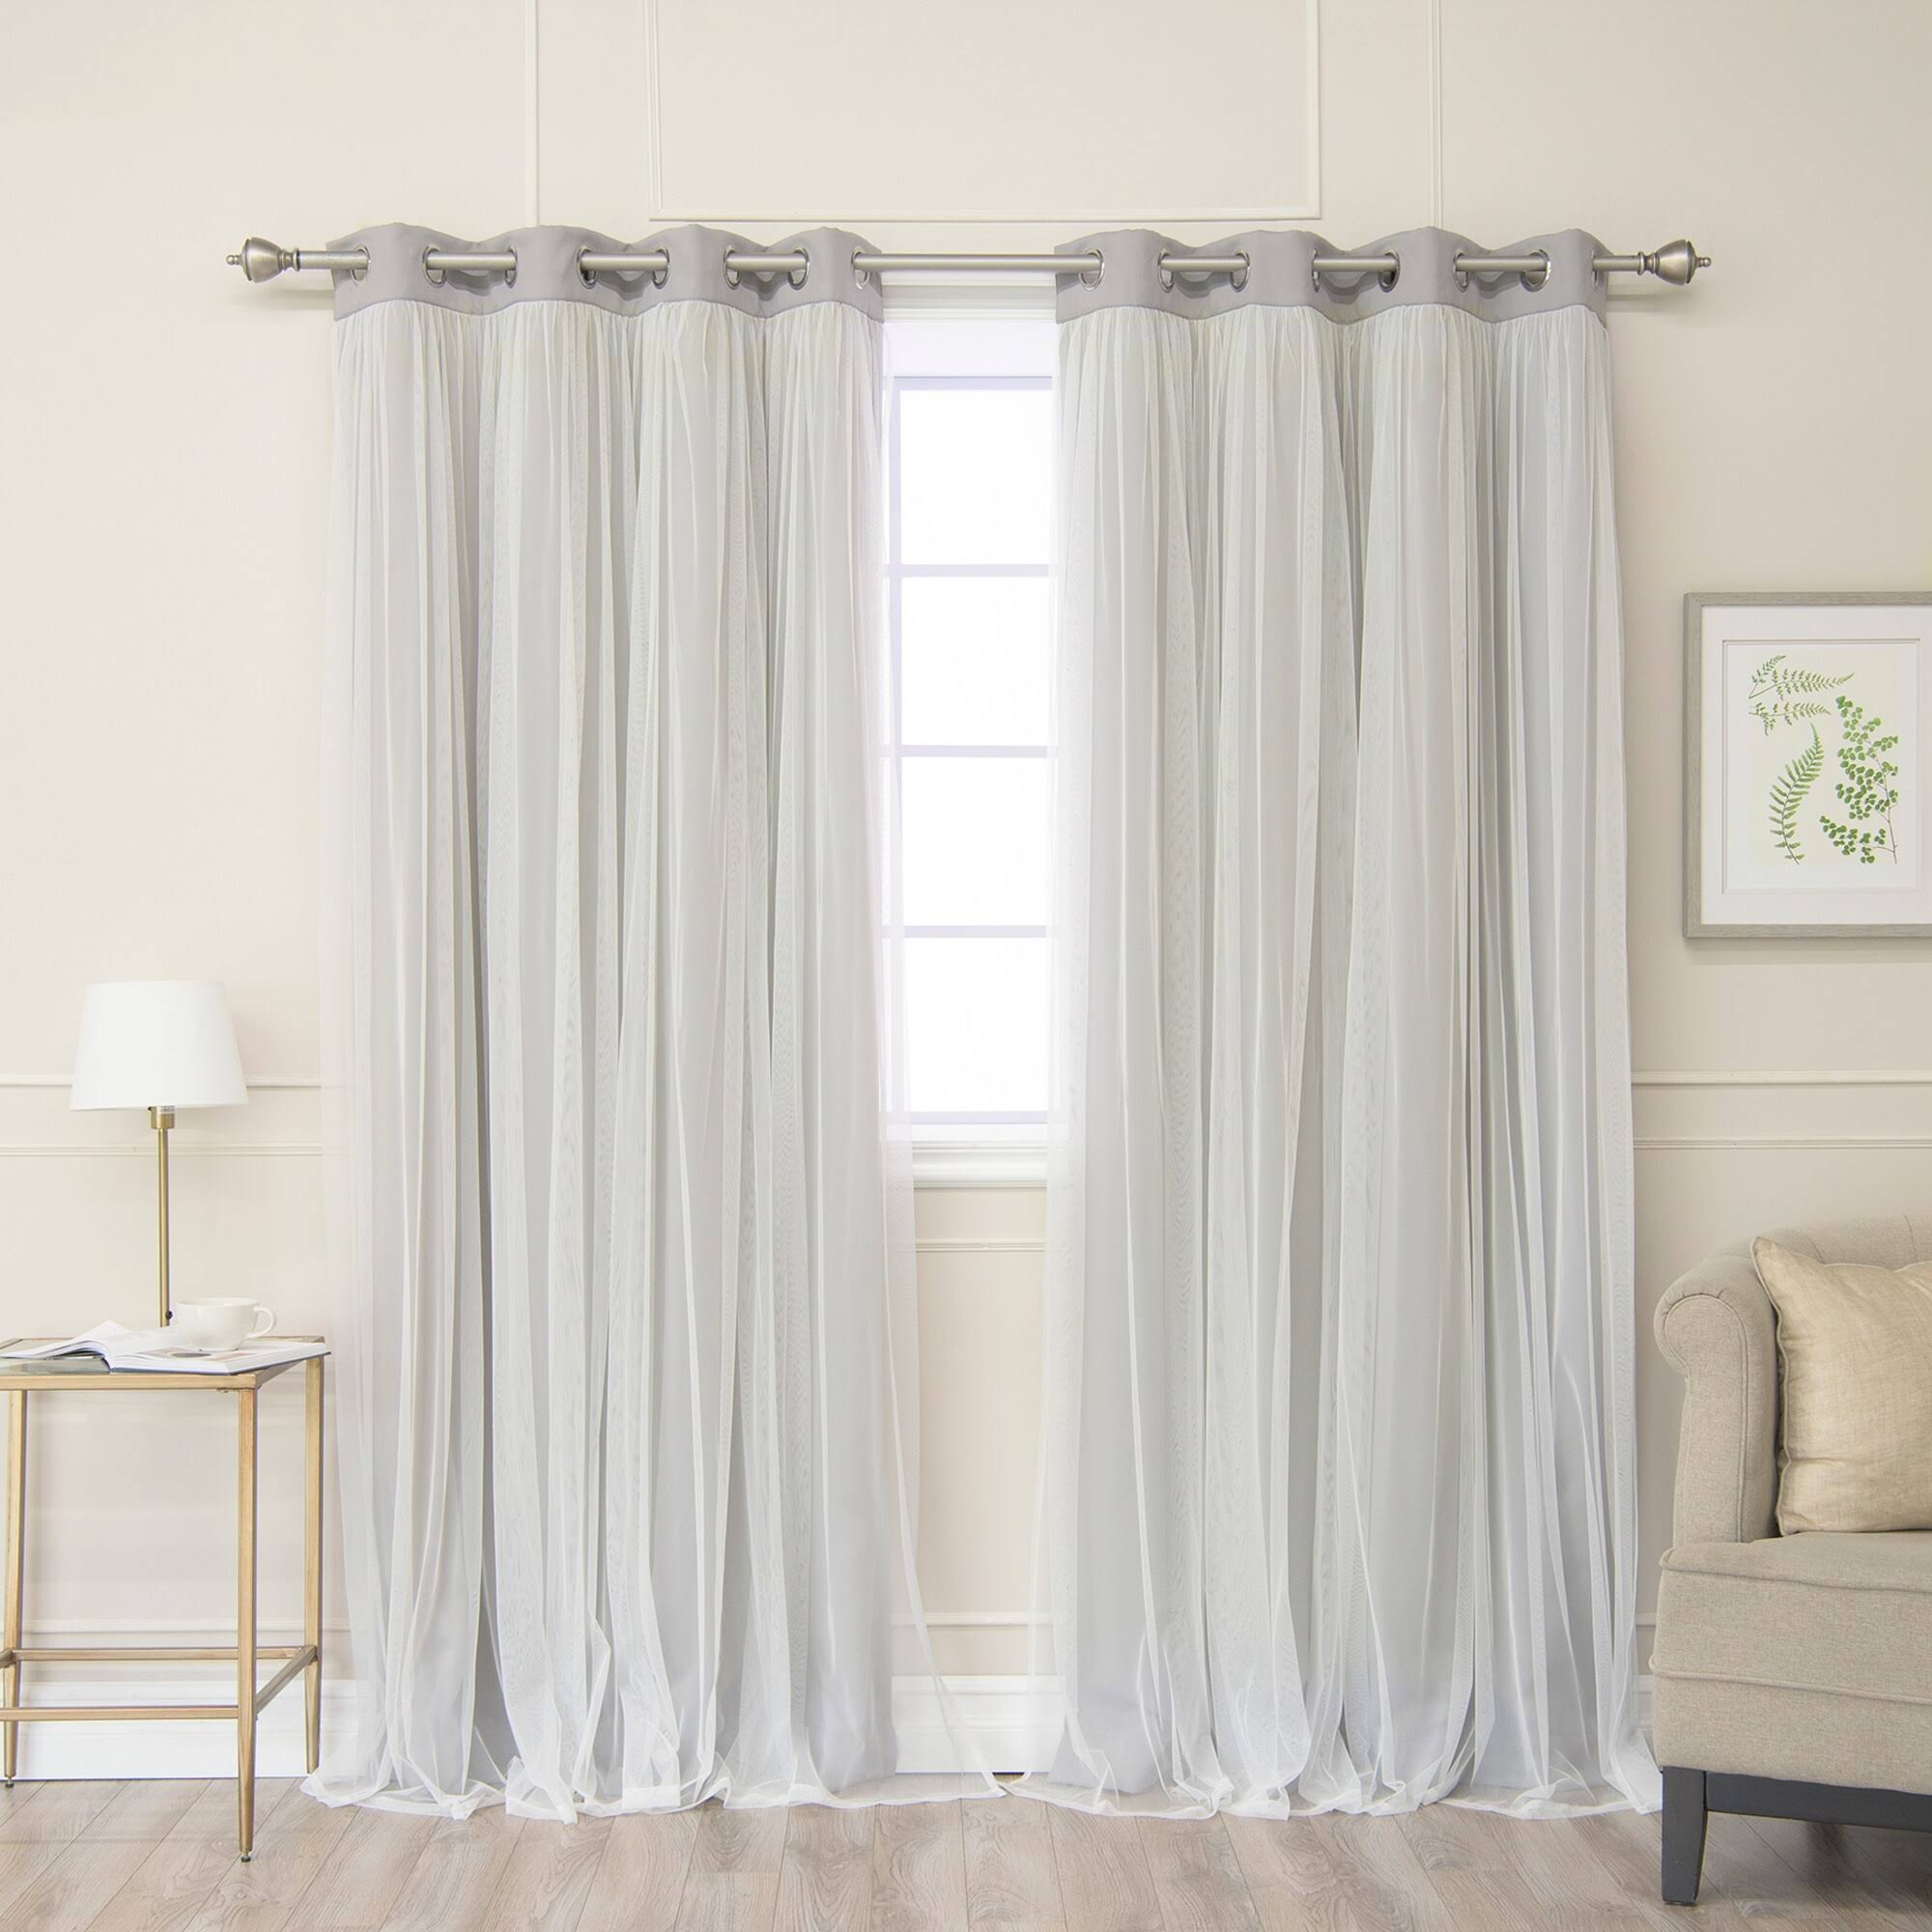 Aurora Home Gathered Tulle Overlay Blackout Curtain Panel Pair - 52 ...